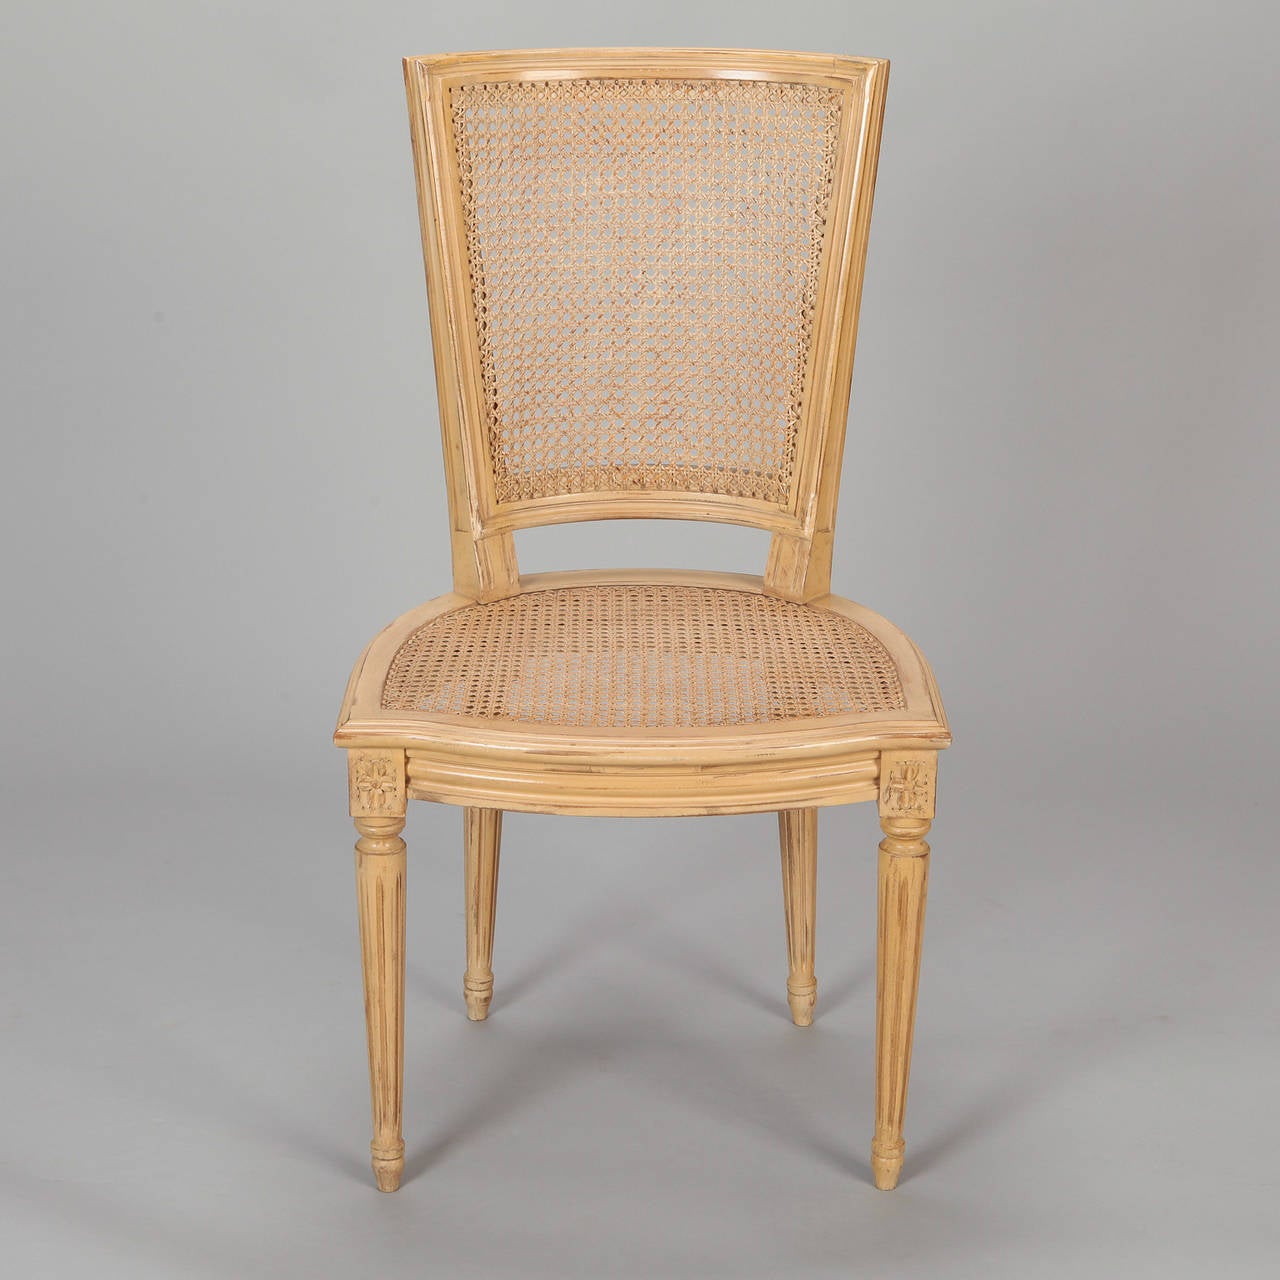 Circa 1930s set of six French chairs with antique earthy mustard painted finish, caned backs and seats. Color matches Pantone 7507 / 7508C.  Seats are 17.5” high and 16.5” deep. Sold and priced as a set.